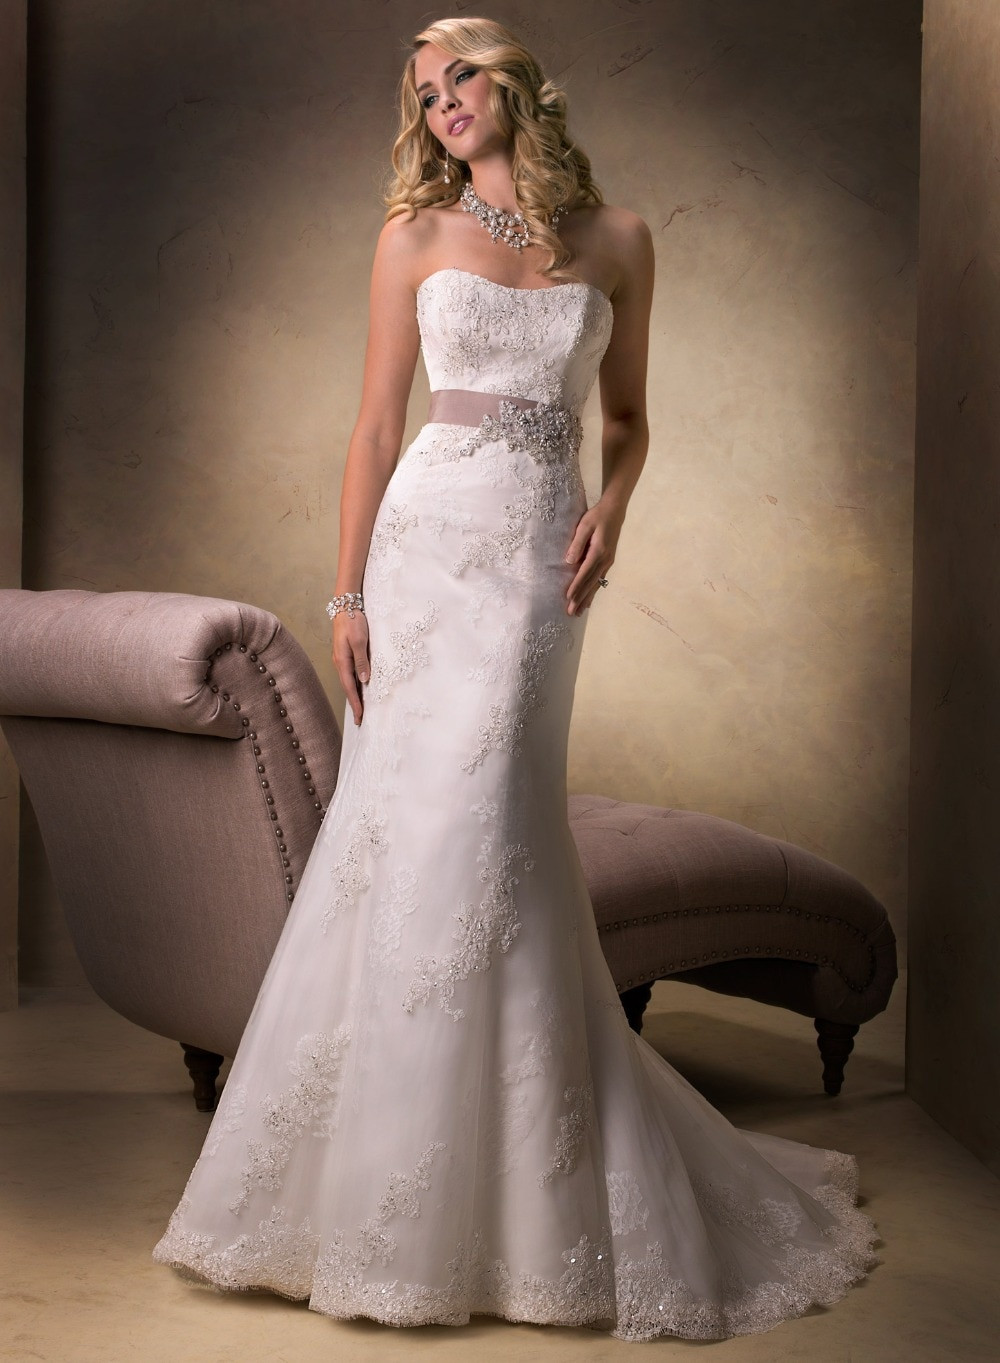 Strapless Wedding Gowns
 Country Western Beaded Strapless Lace Wedding Dresses Fit